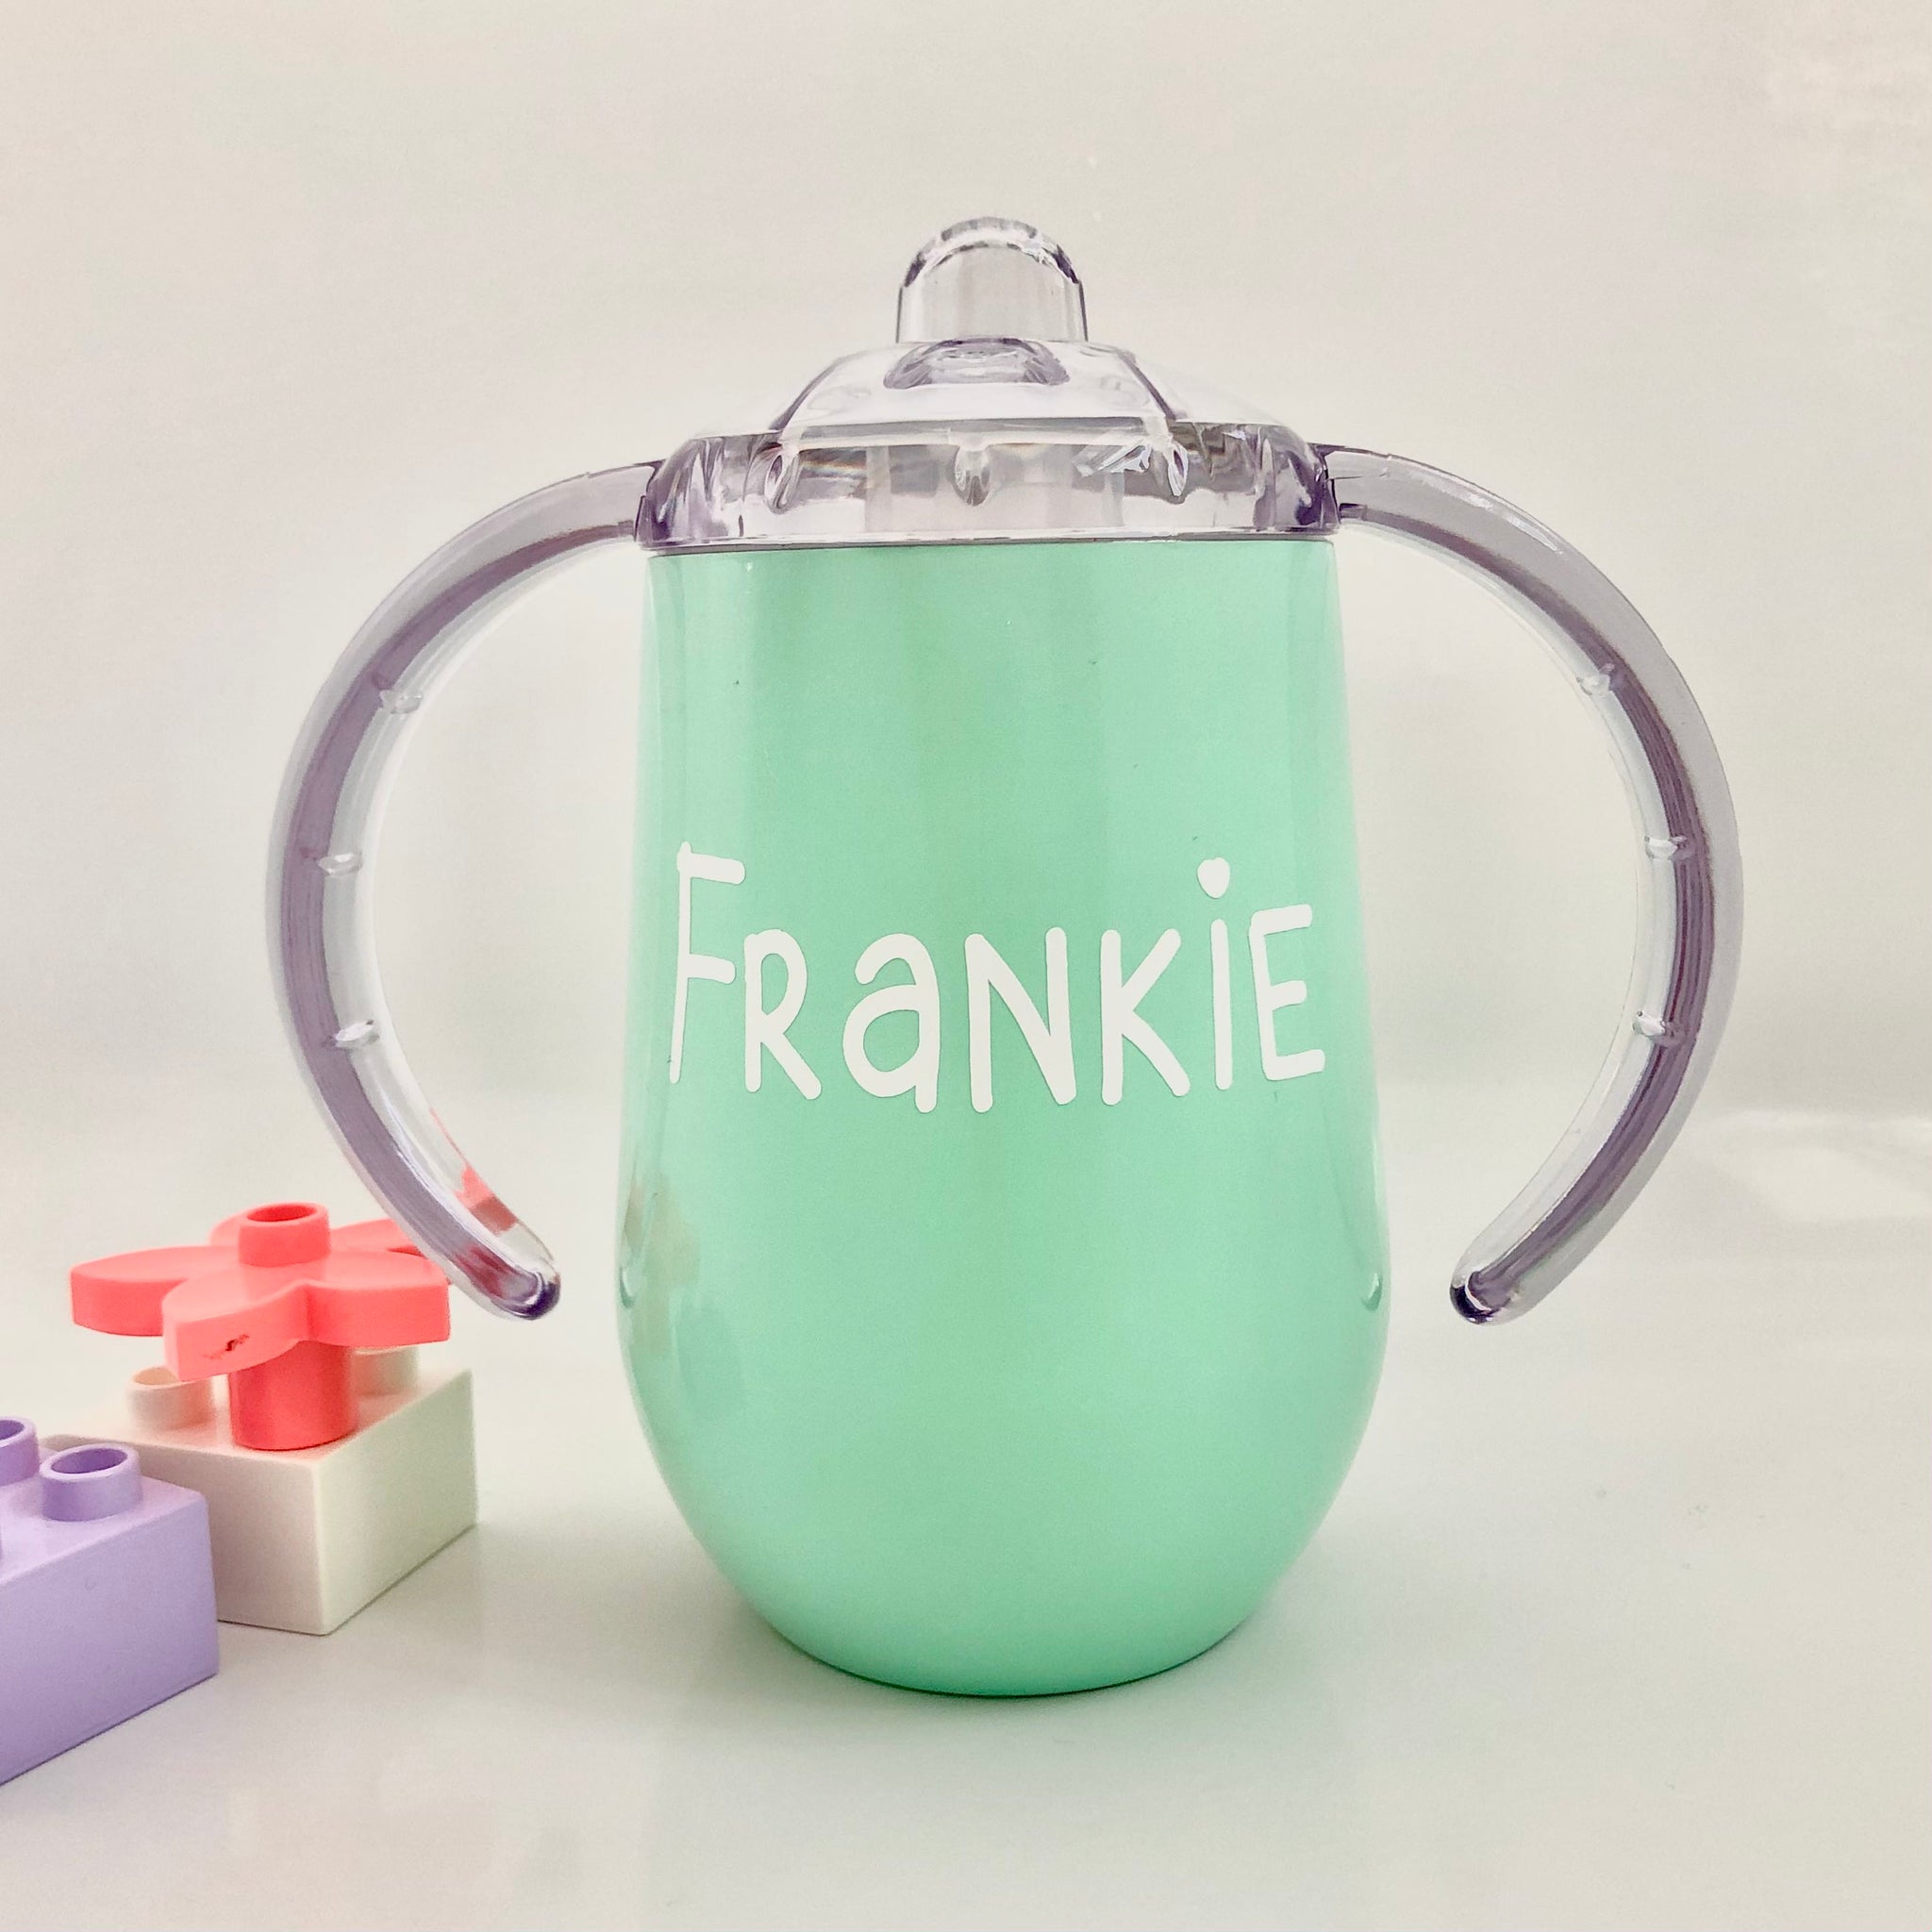 The Sippy Cup: Friend or Foe? - The Smile Shop